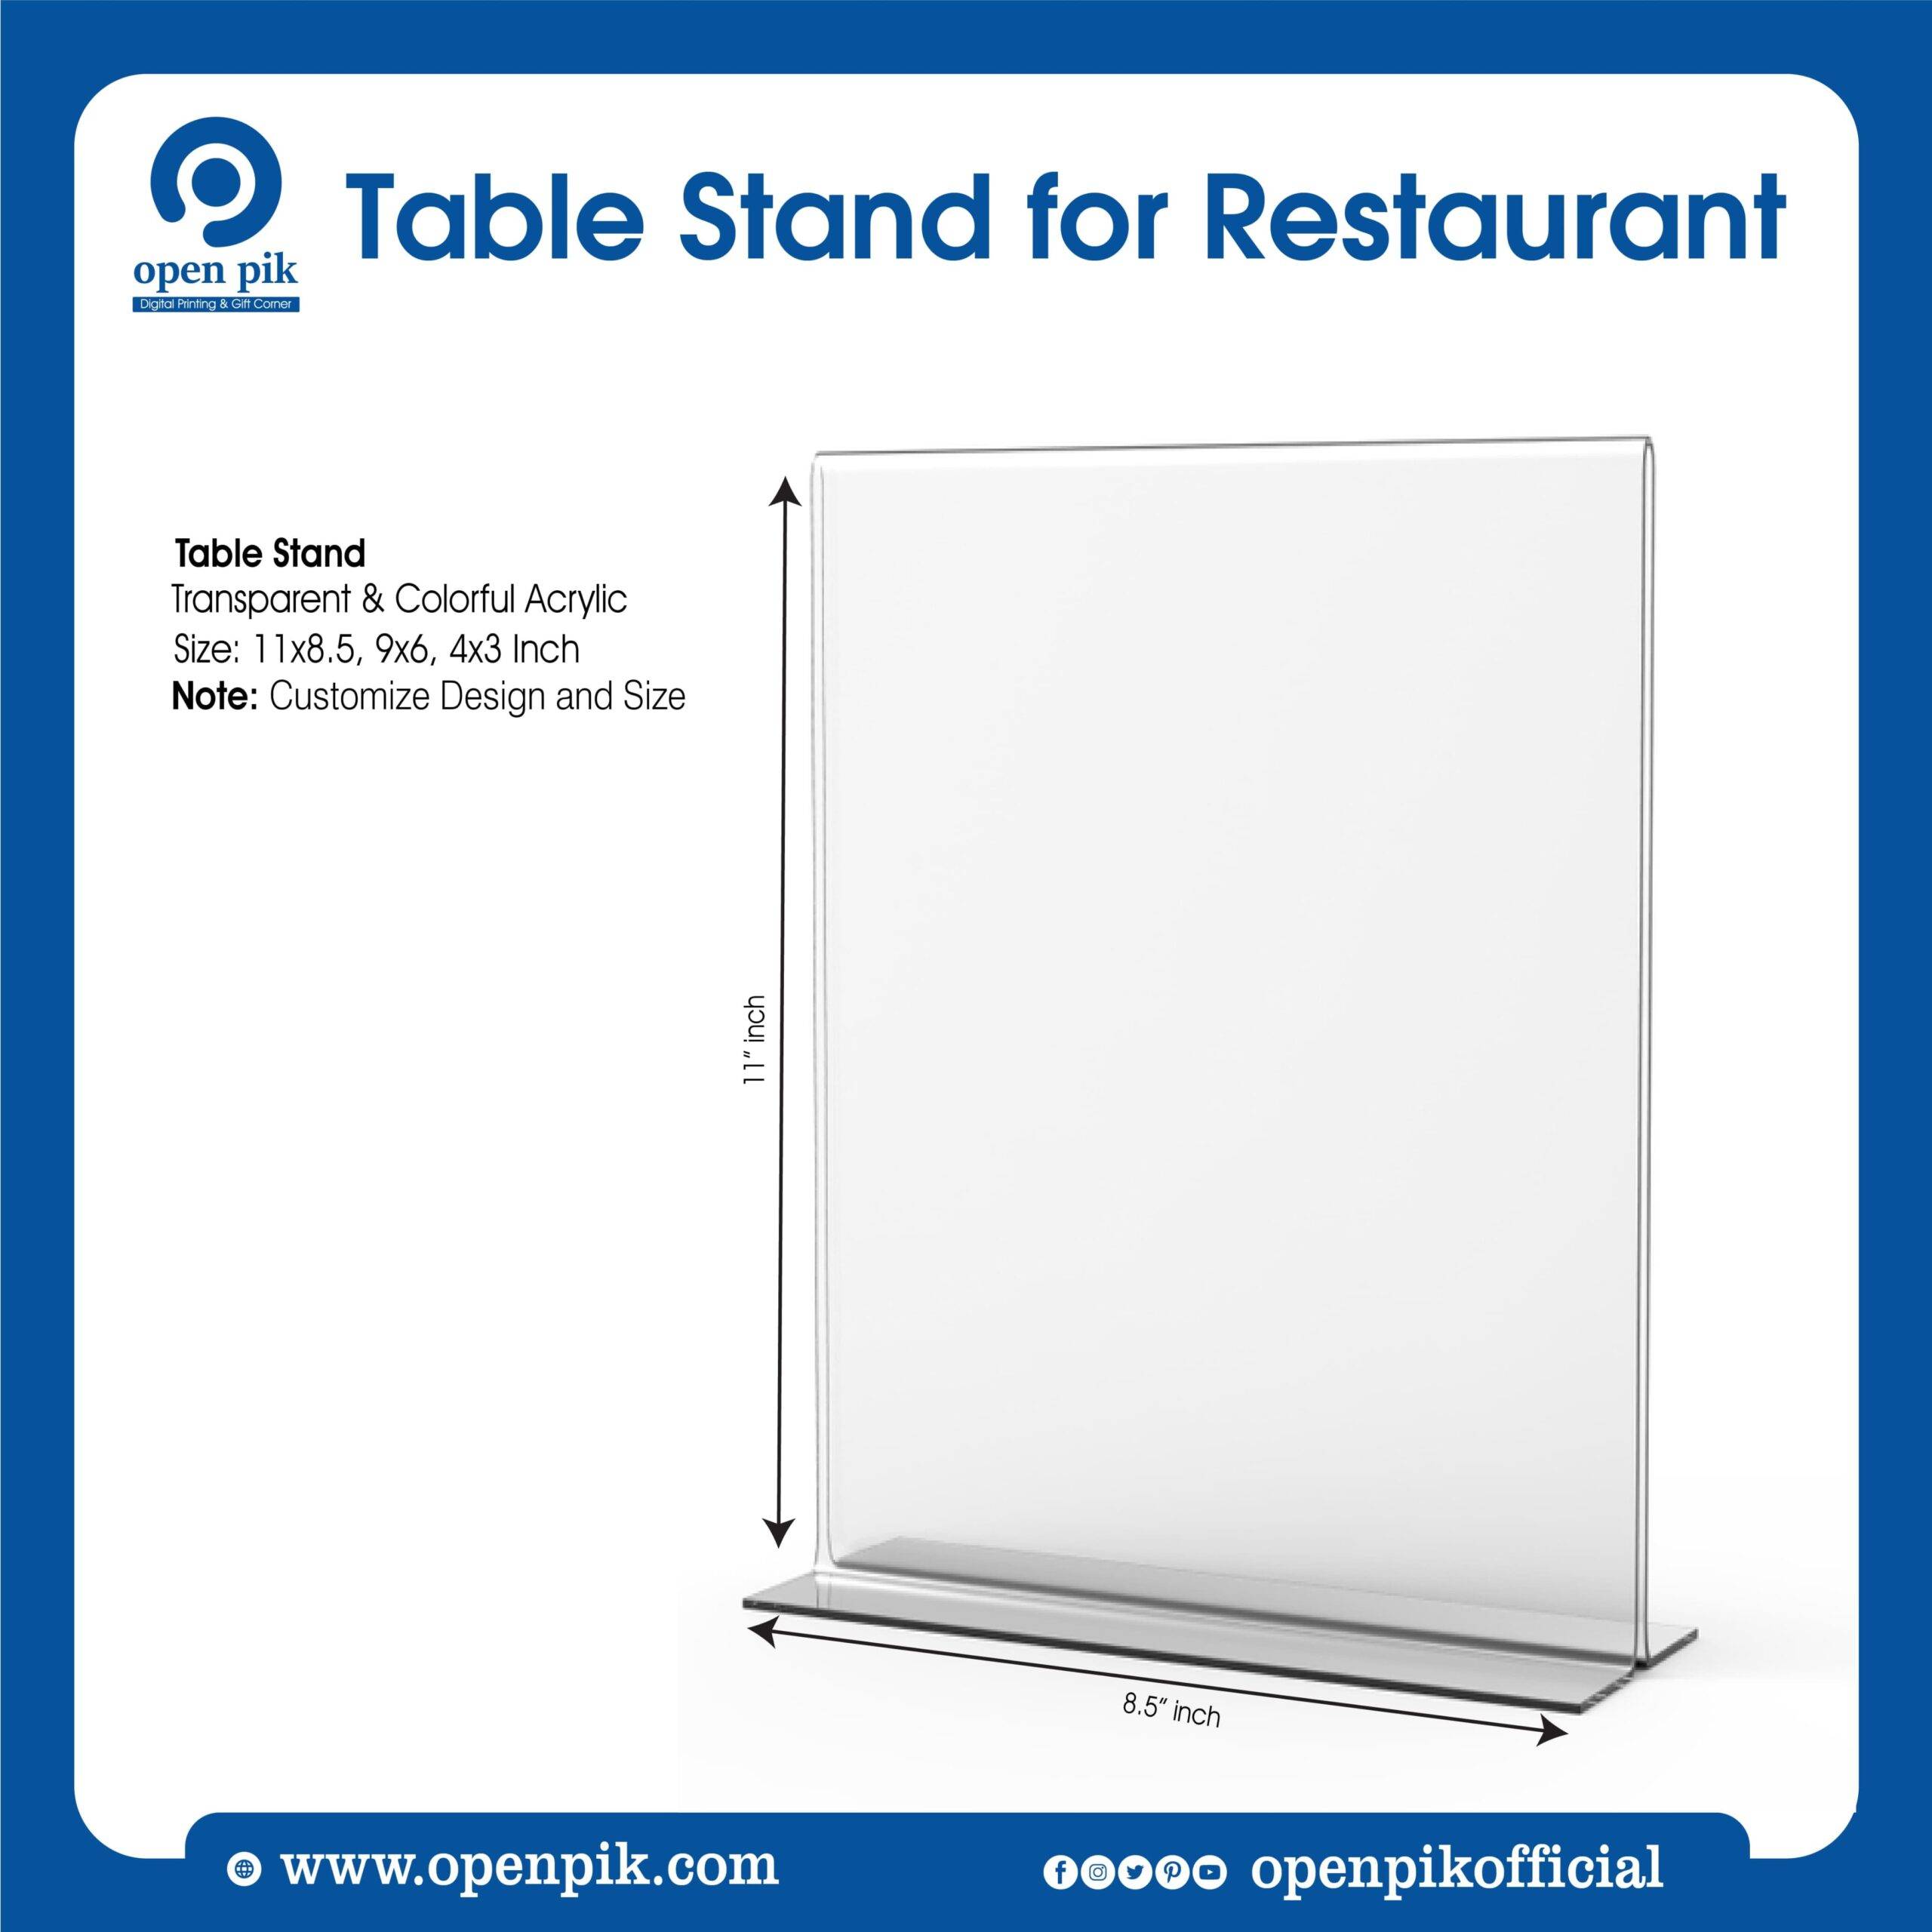 table stand for restaurant (2)